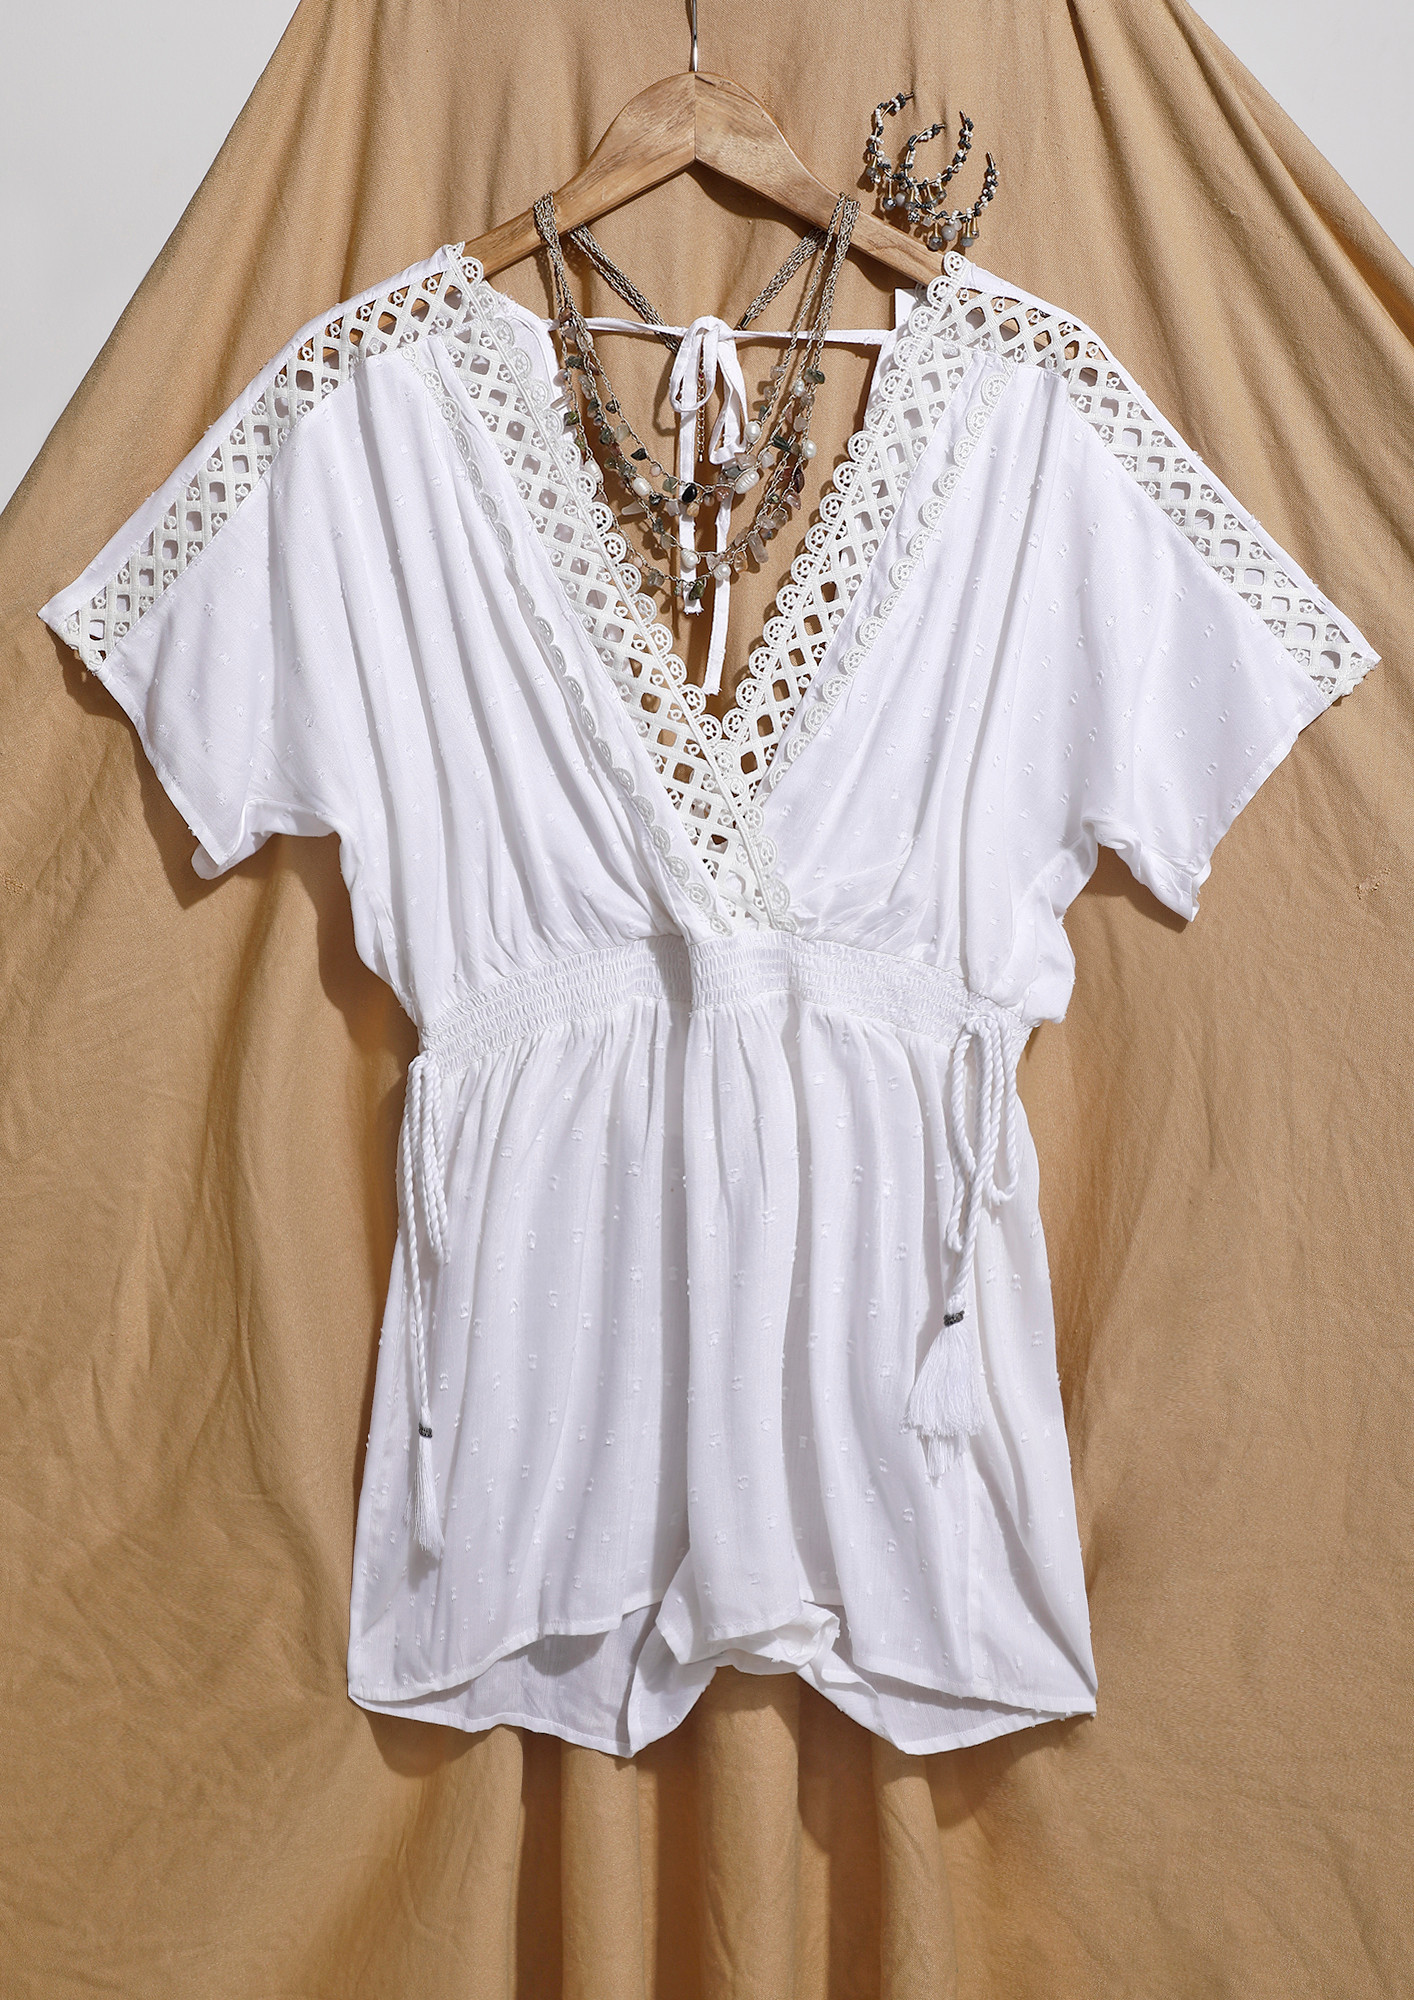 WHITE PLAYSUIT WITH HOLLOW-OUT PATTERNED EDGES